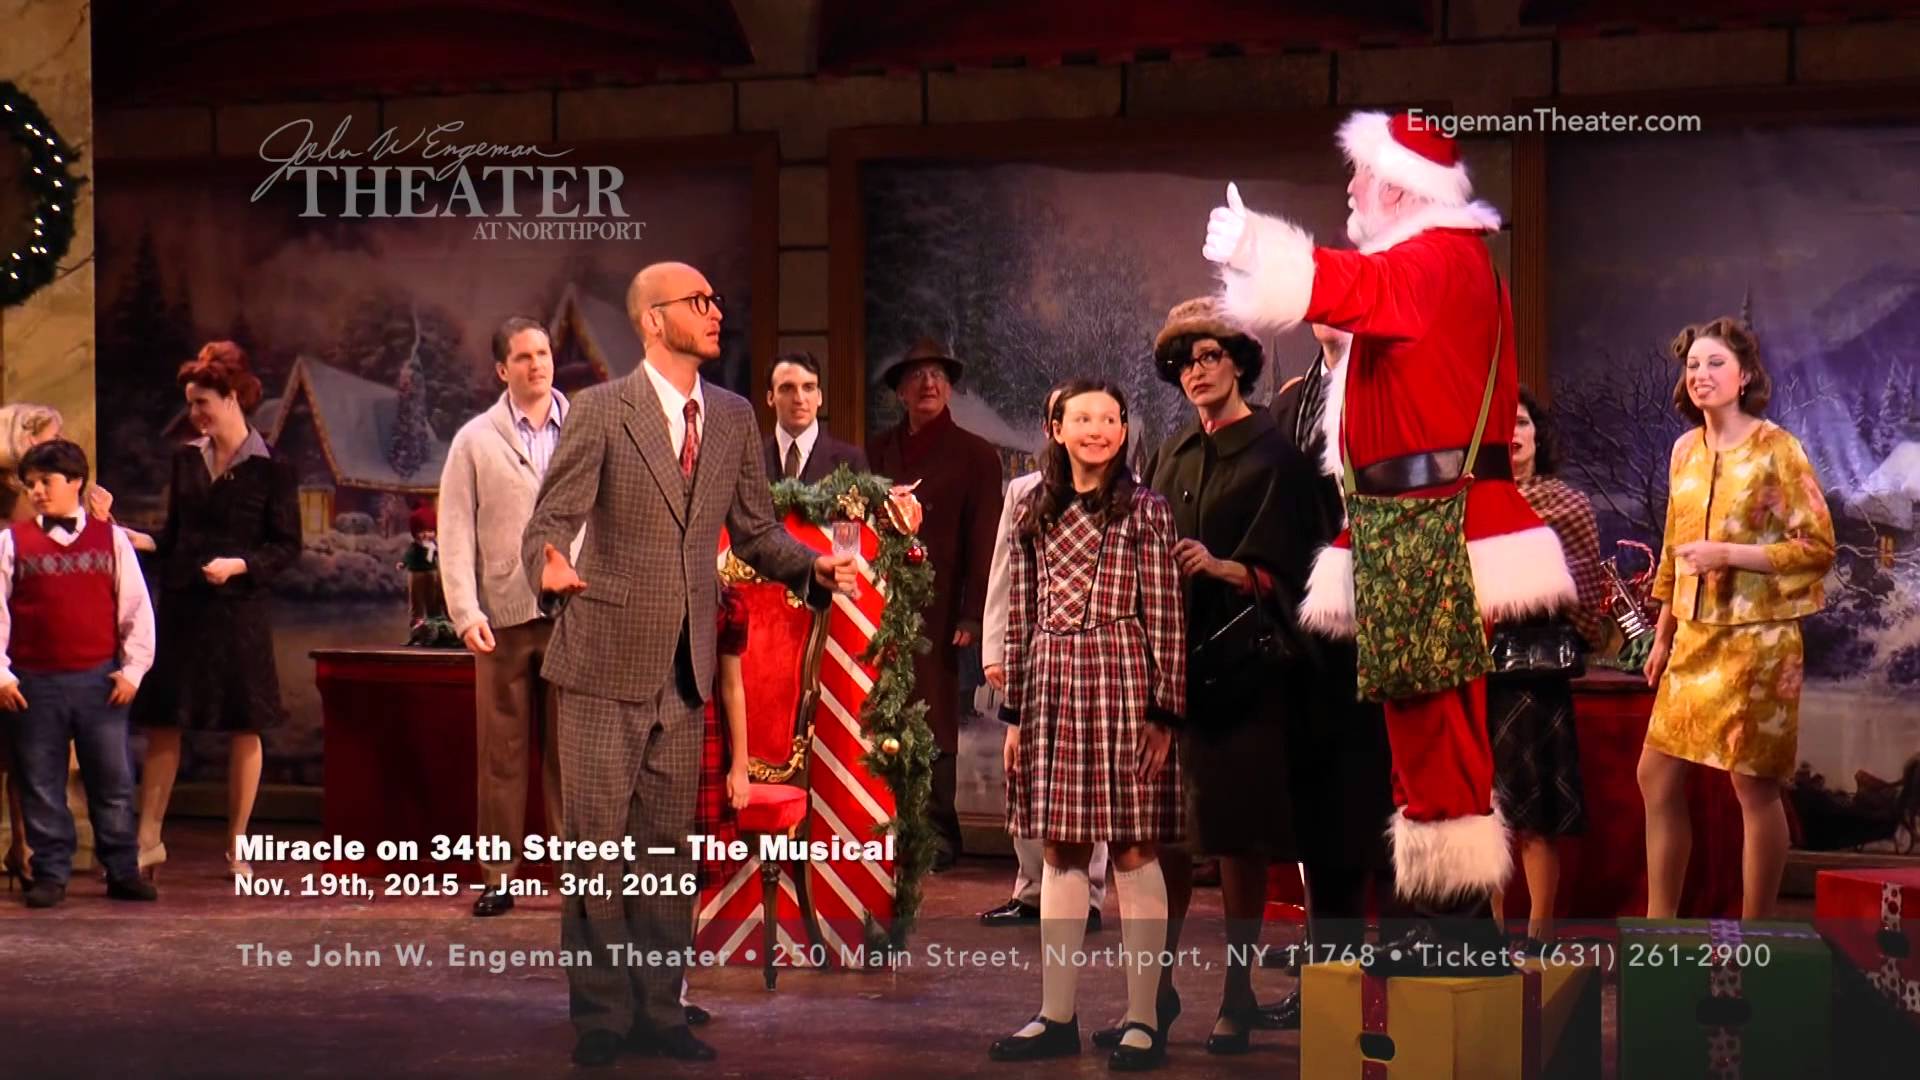 Miracle on 34th The Musical
Playing at the John W. Engeman Theater in...